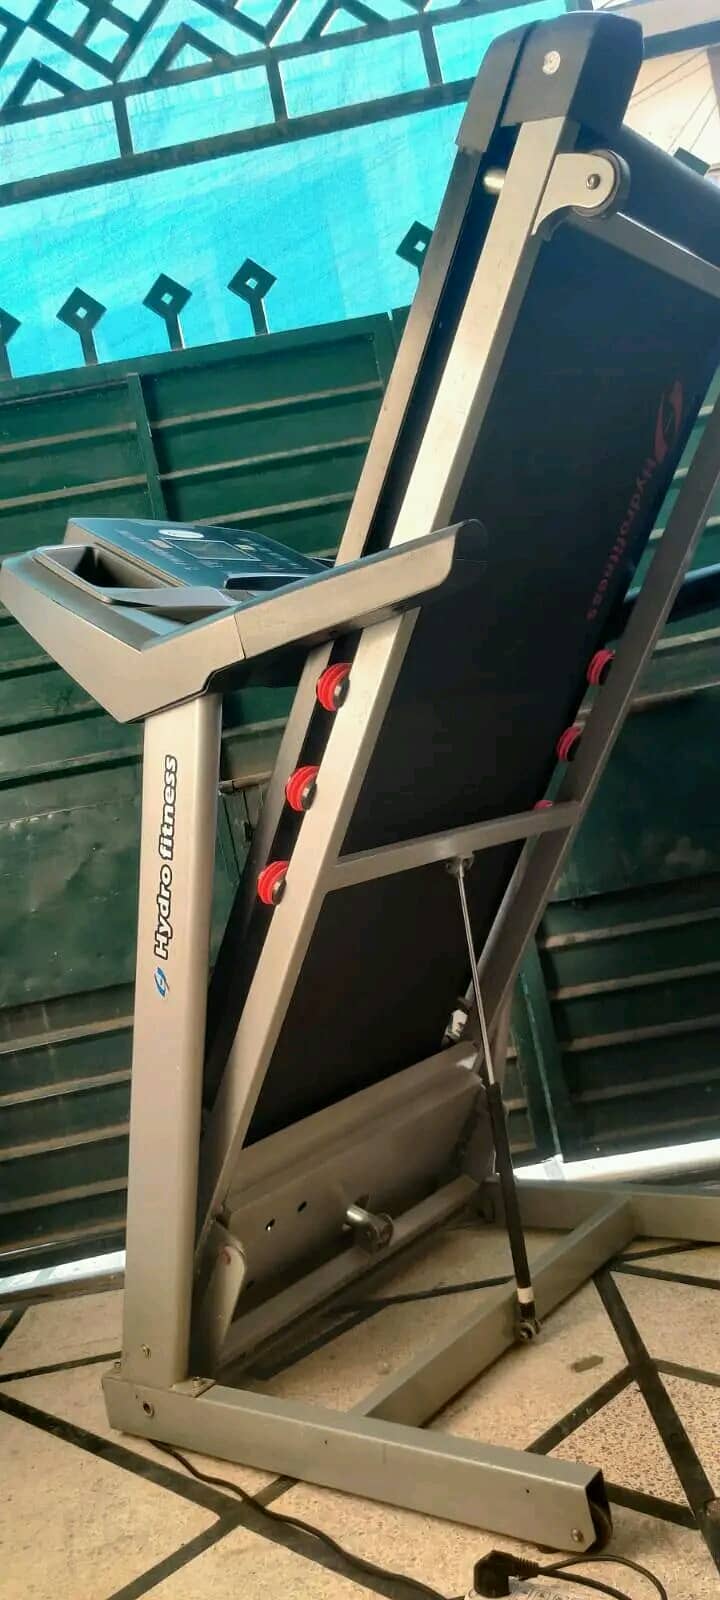 Hydro fitness electrical treadmill 0316/1736/128 whasapp 11